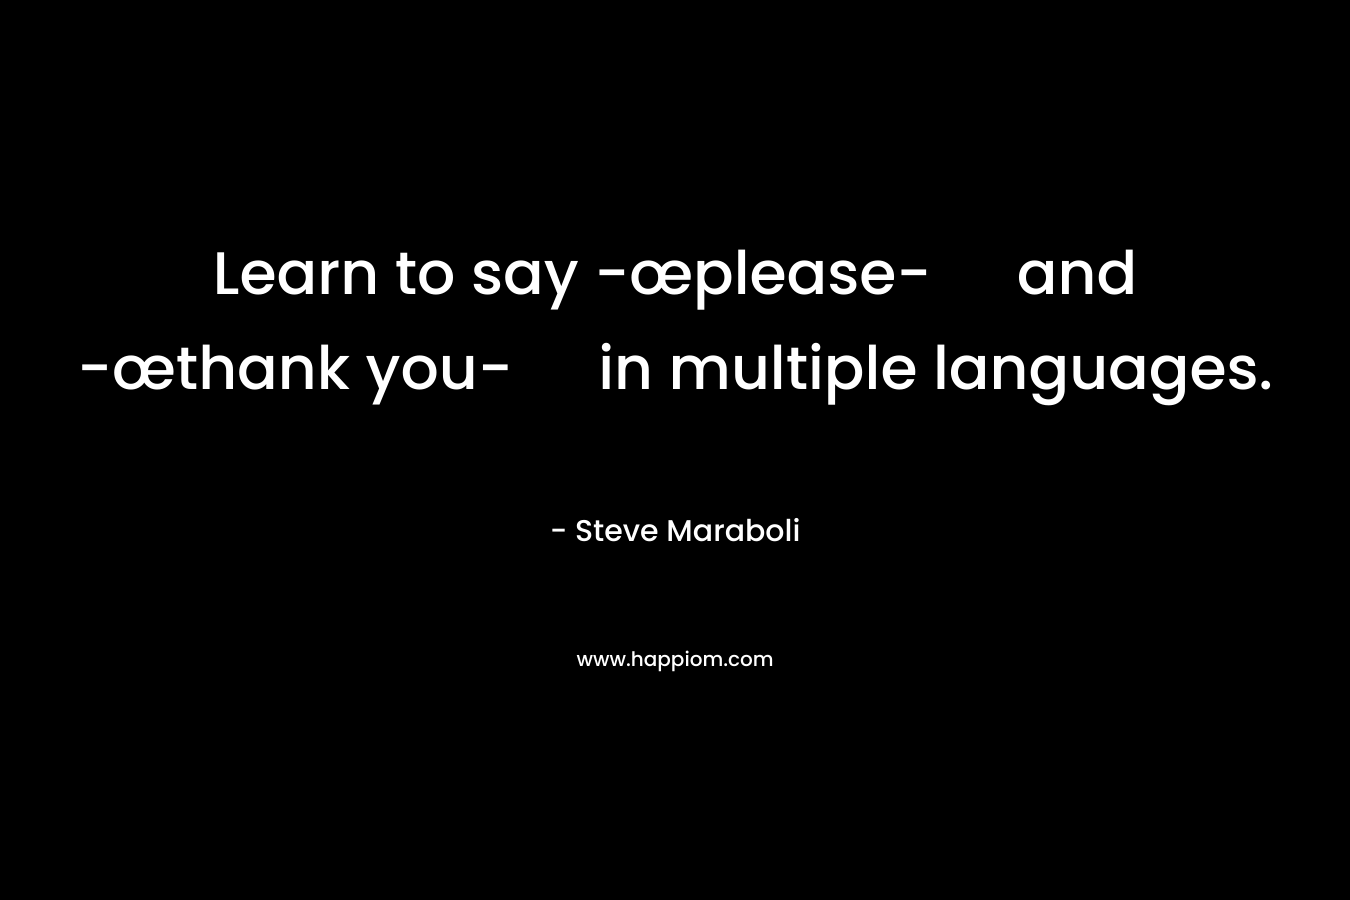 Learn to say -œplease- and -œthank you- in multiple languages.